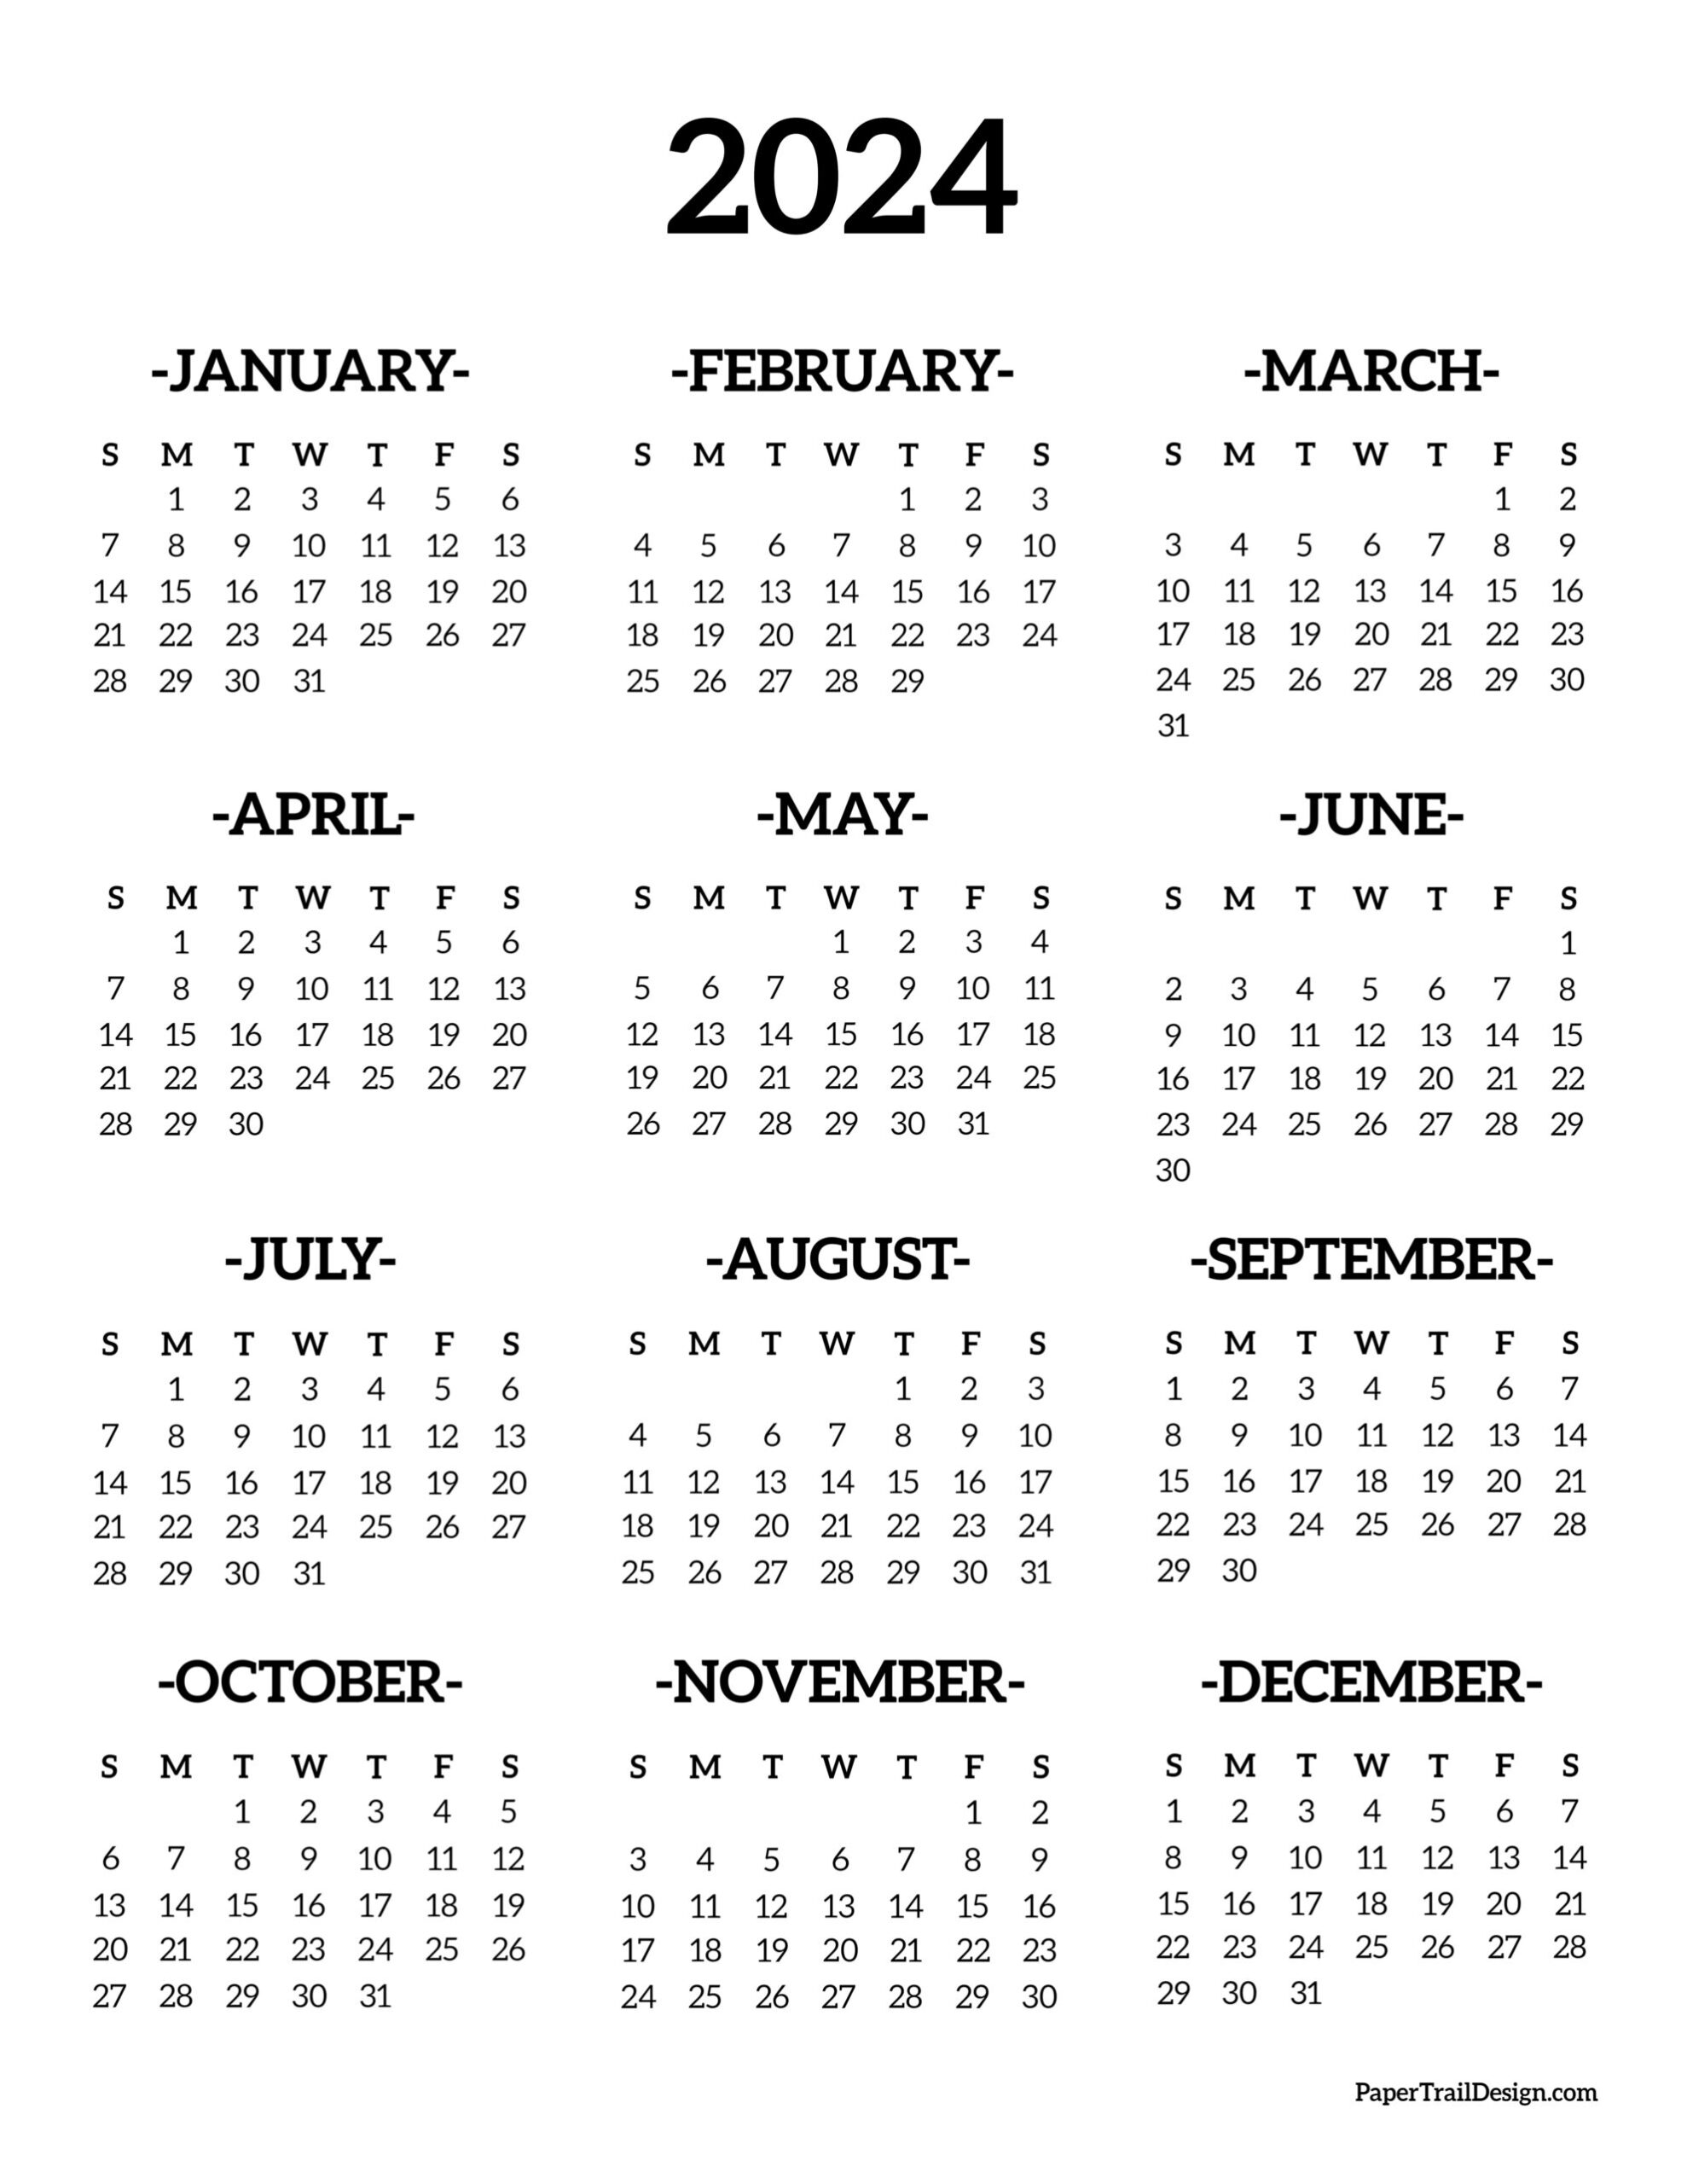 Calendar 2024 Printable One Page - Paper Trail Design for Free Printable 2024 Calendar Printable